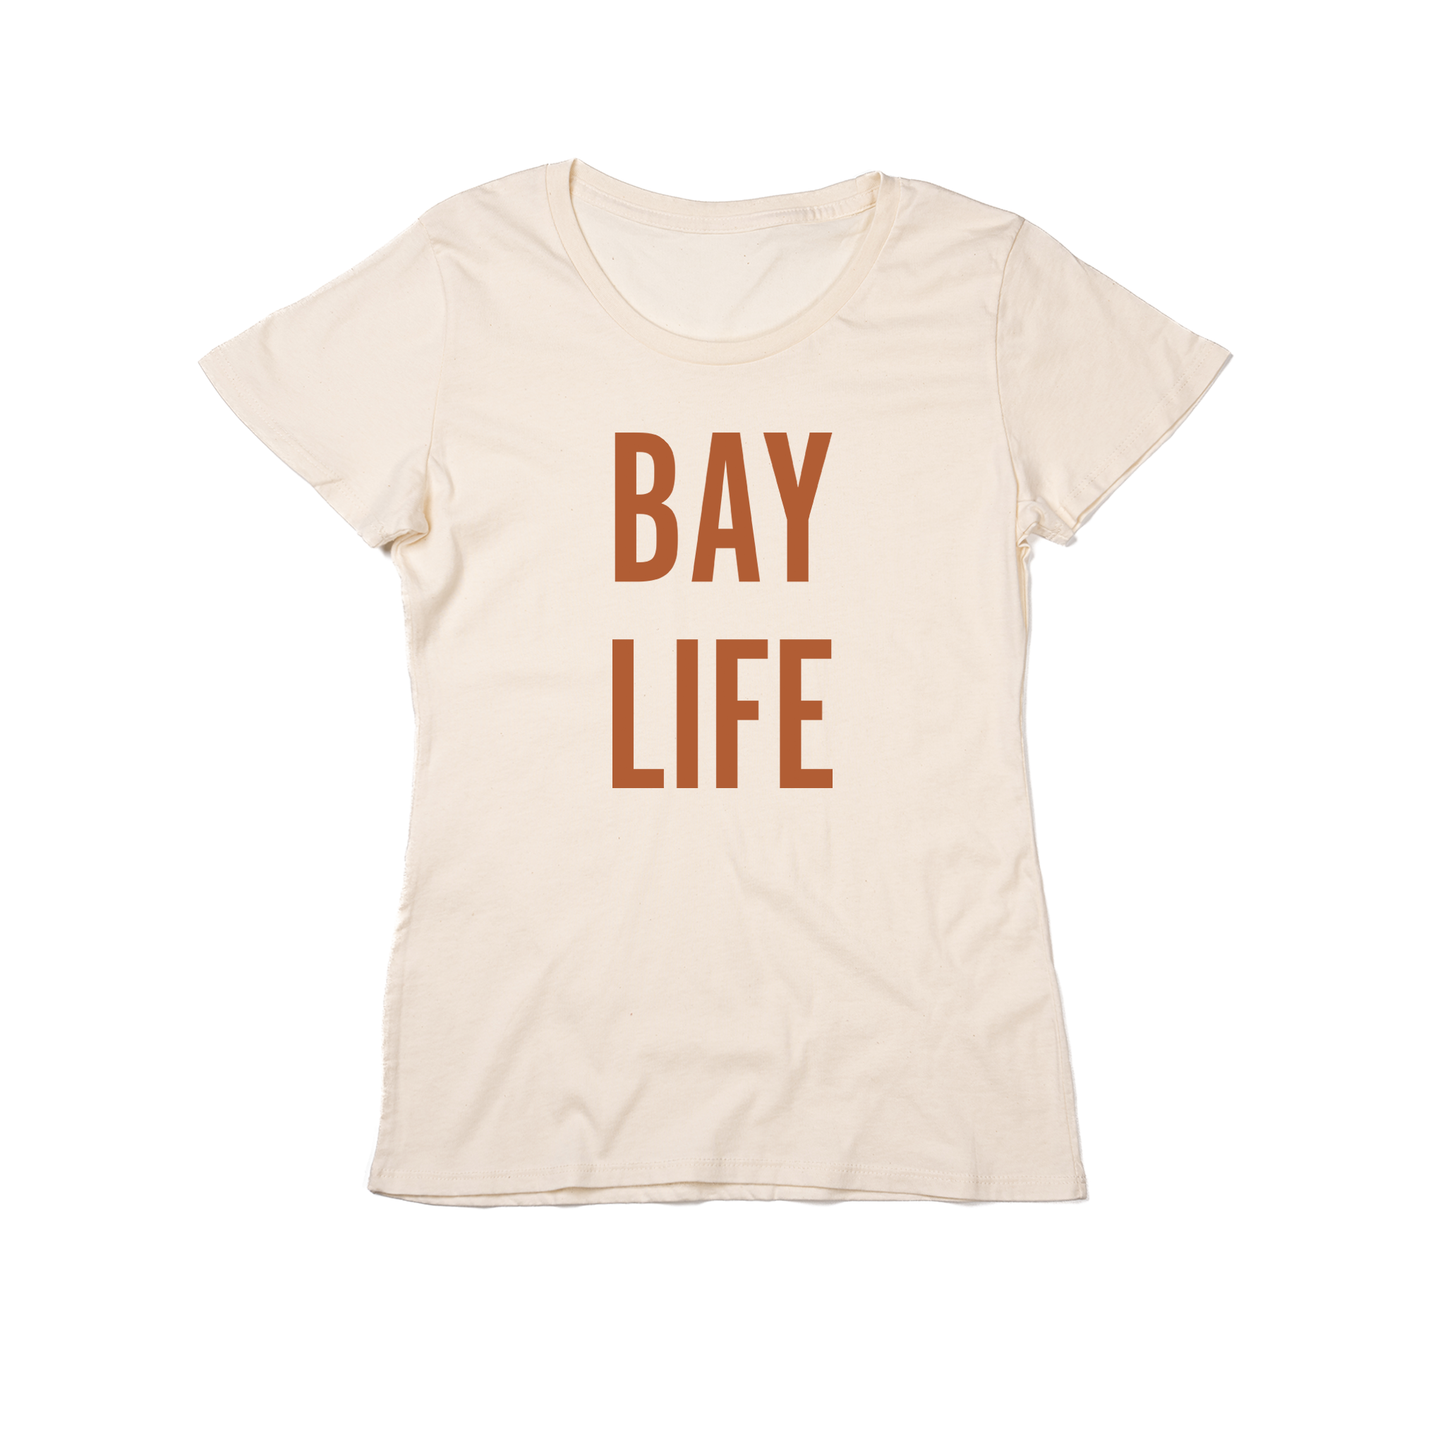 Bay Life (Rust) - Women's Fitted Tee (Natural)